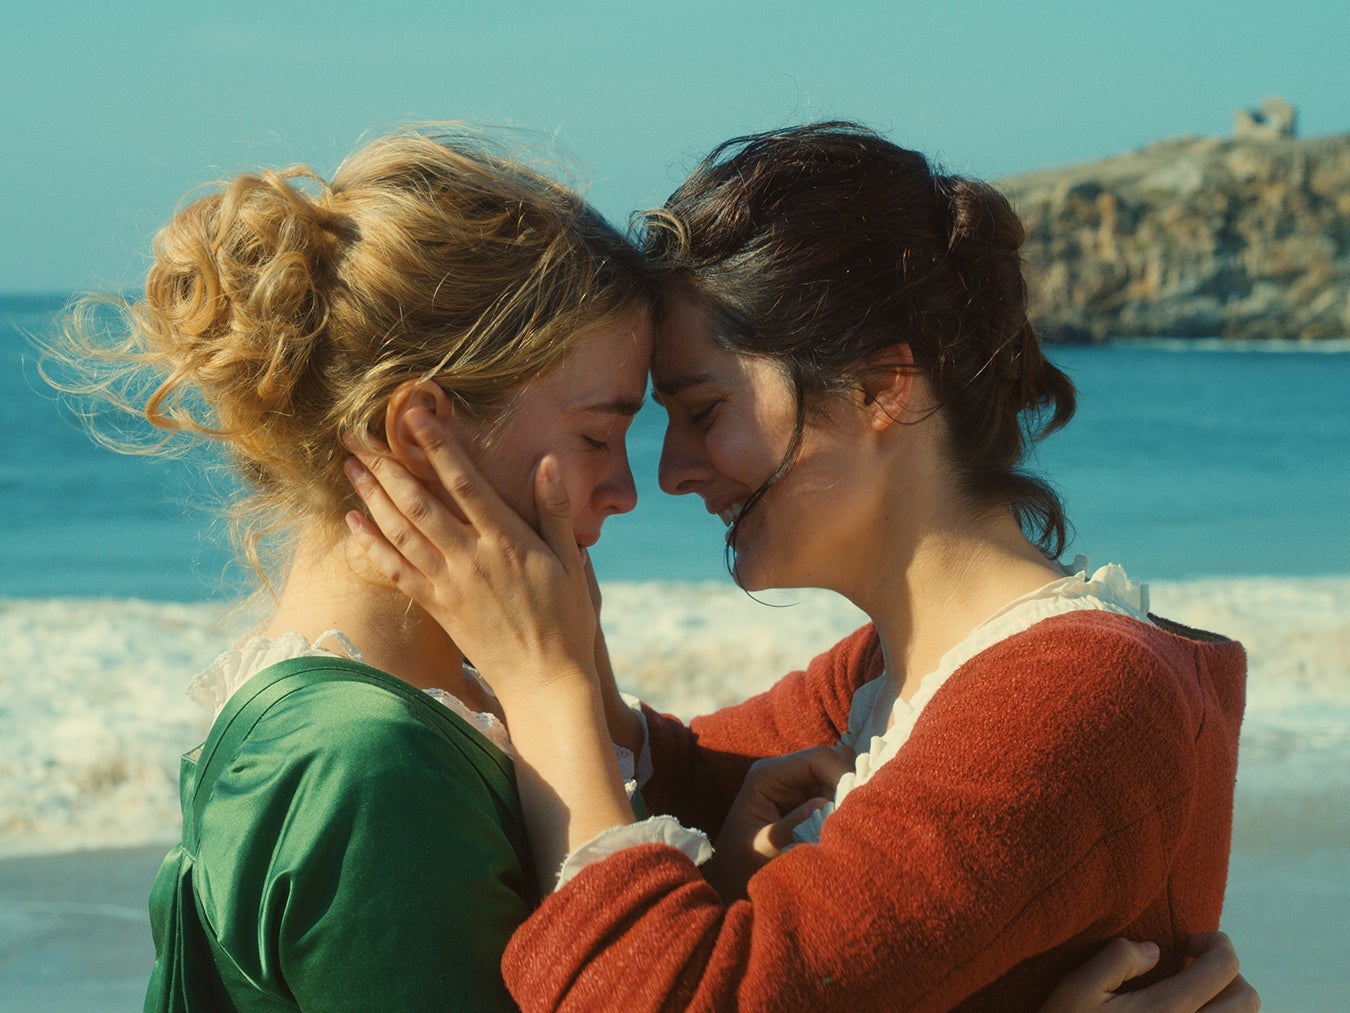 Adèle Haenel as Héloïse and Noémie Merlant as Marianne in ‘Portrait of a Lady on Fire’